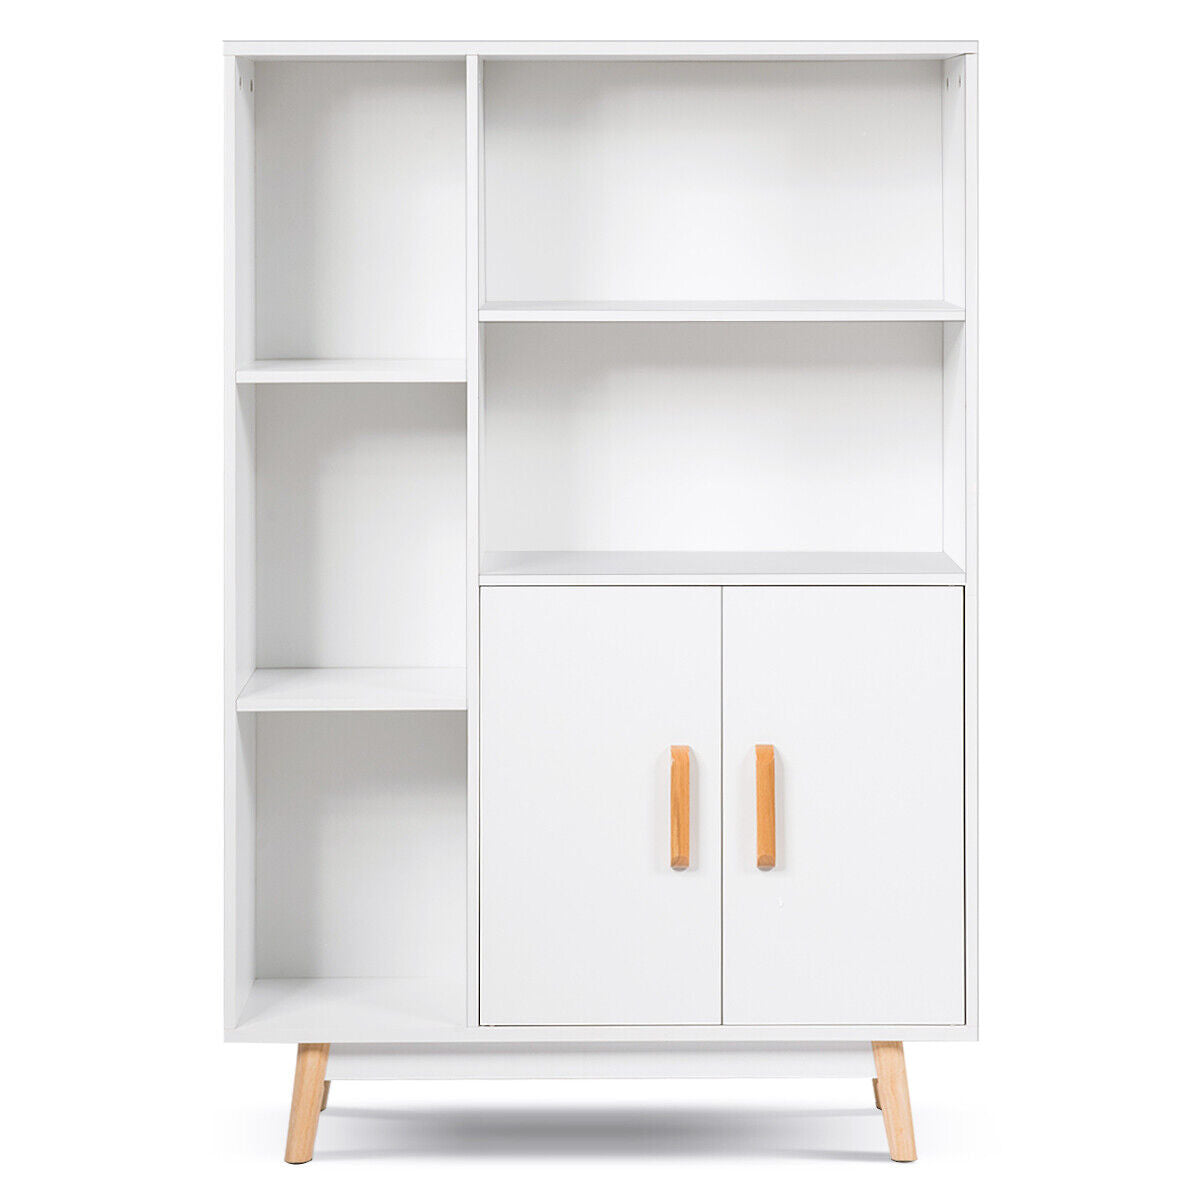 Storage Cabinet With Doors And Shelves - Kitchen Storage Cabinets